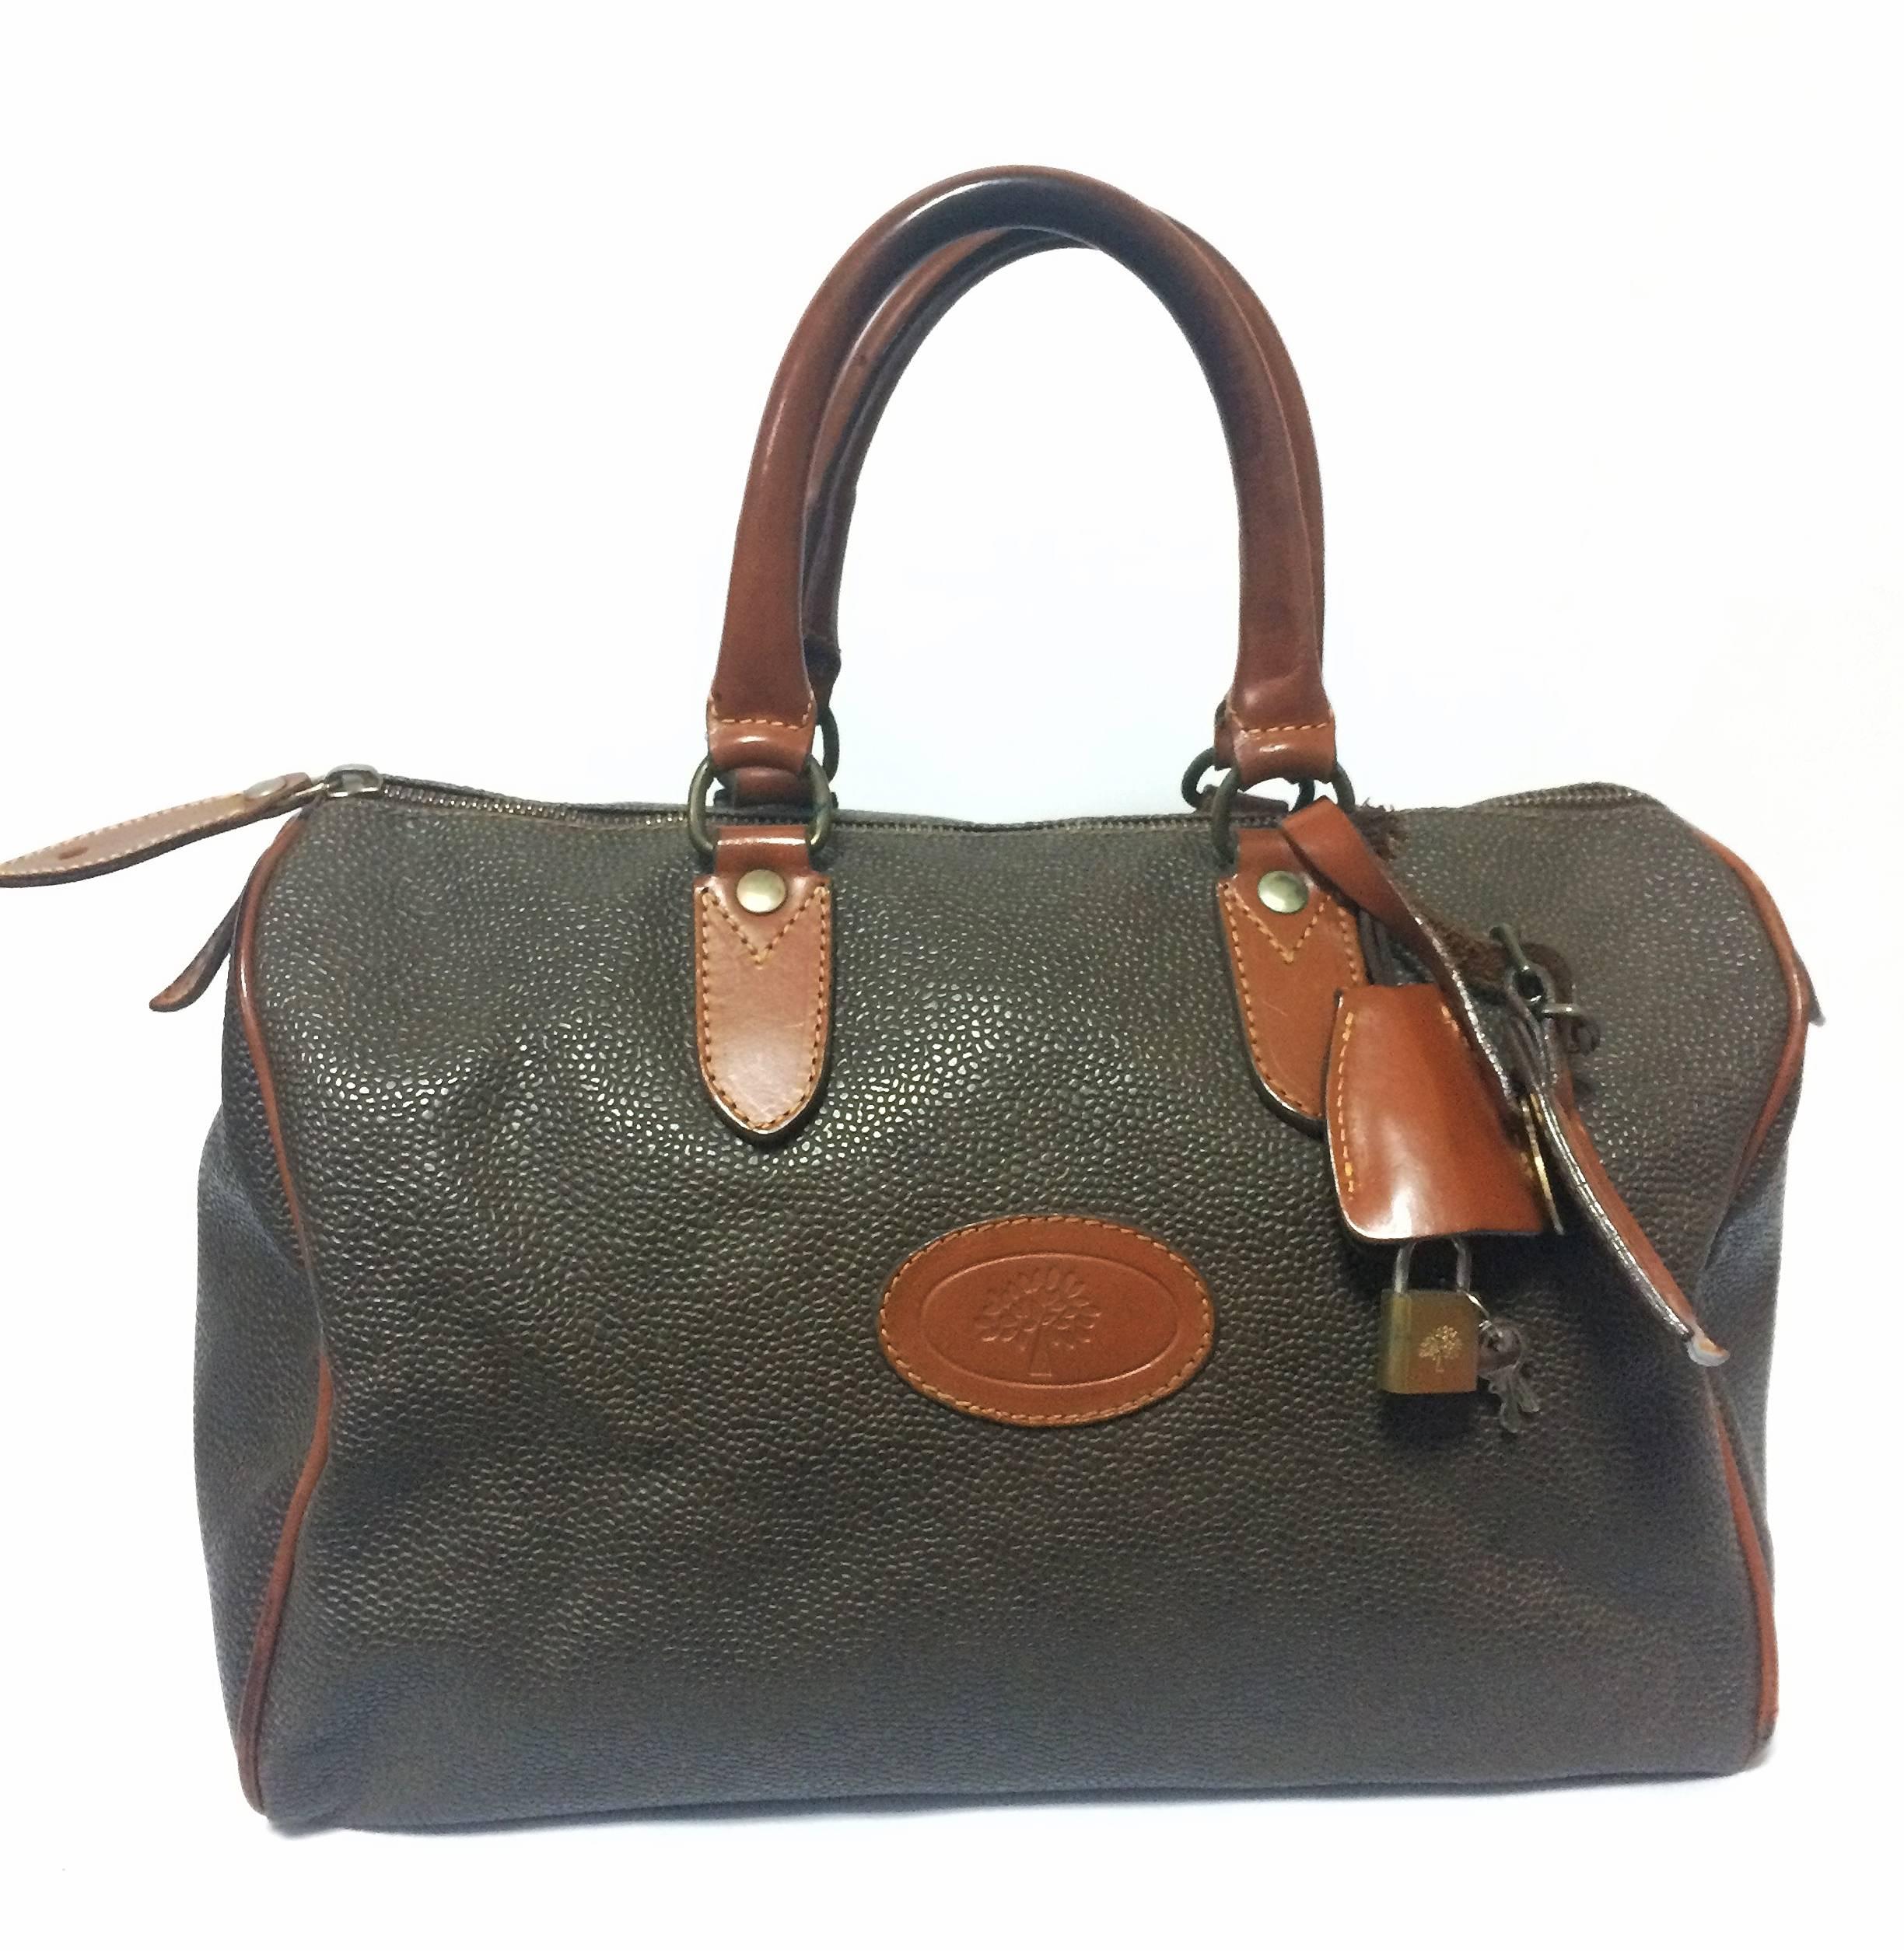 1990s. Vintage Mulberry khaki green scotchgrain duffle purse with brown leather trimmings. Unisex use for daily use. work school bag. Speedy style.

This is a sophisticated vintage piece, speedy style duffle bag from Mulberry in the early 90s.